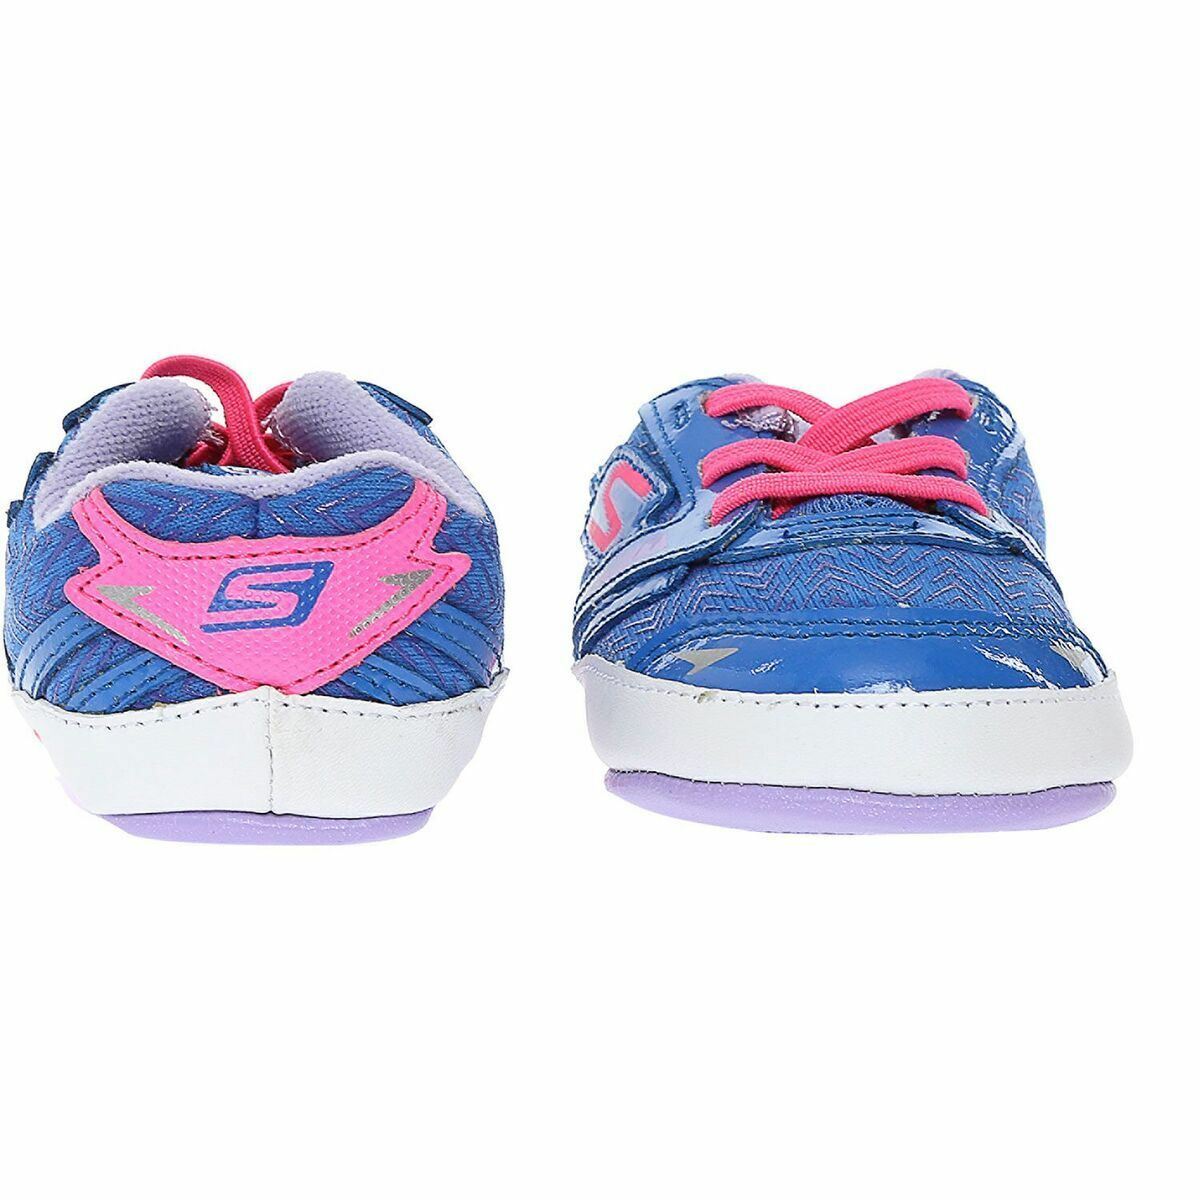 SKECHERS Baby - Blue & Pink Leather Trainers Shoes Infant Size 3  Gift Boxed